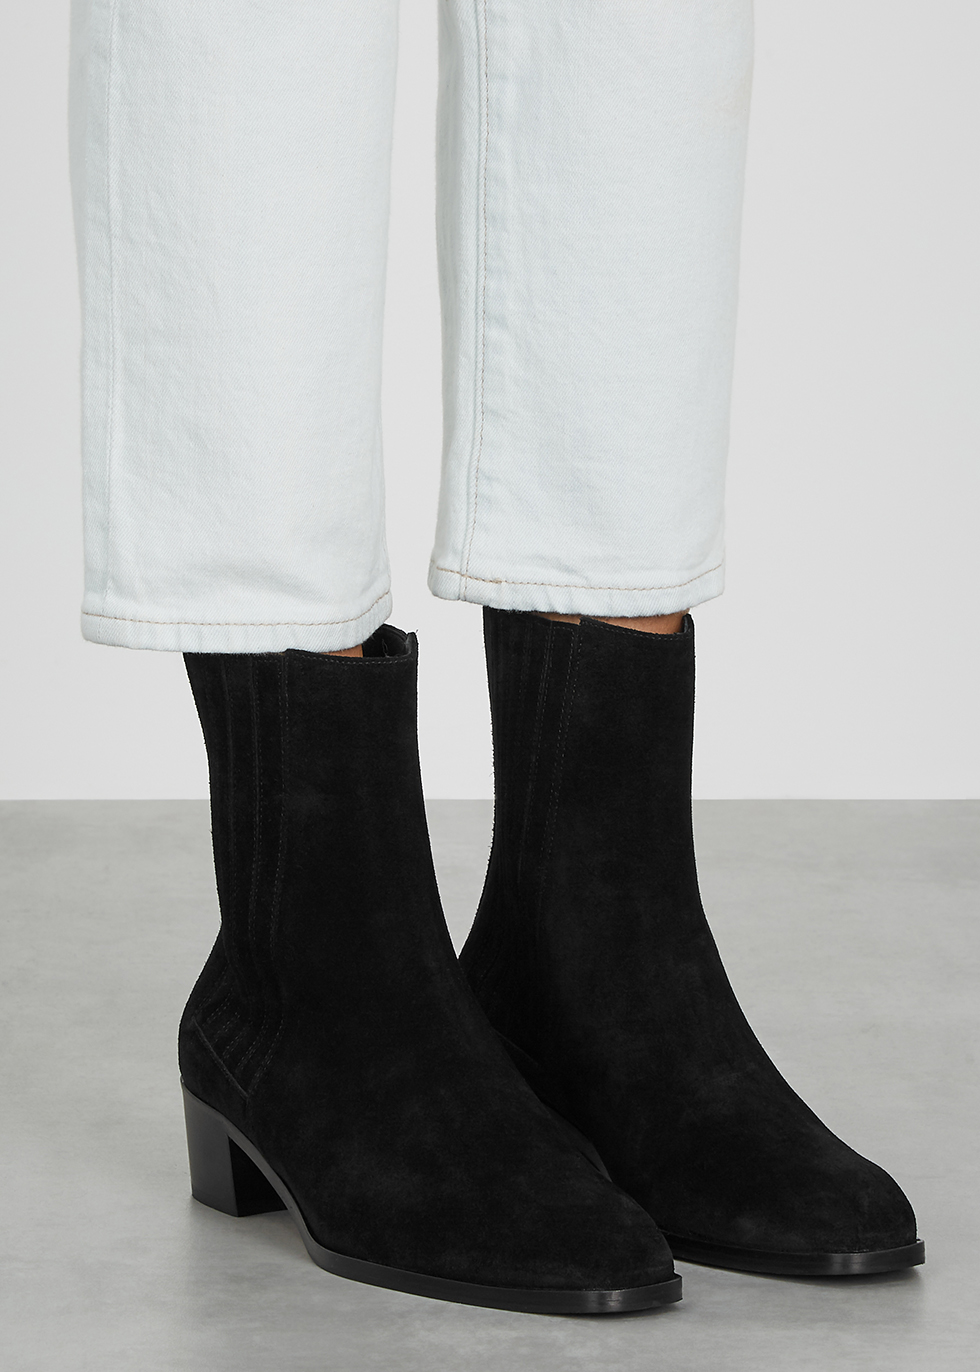 aeyde Neil 40 black suede Chelsea boots 